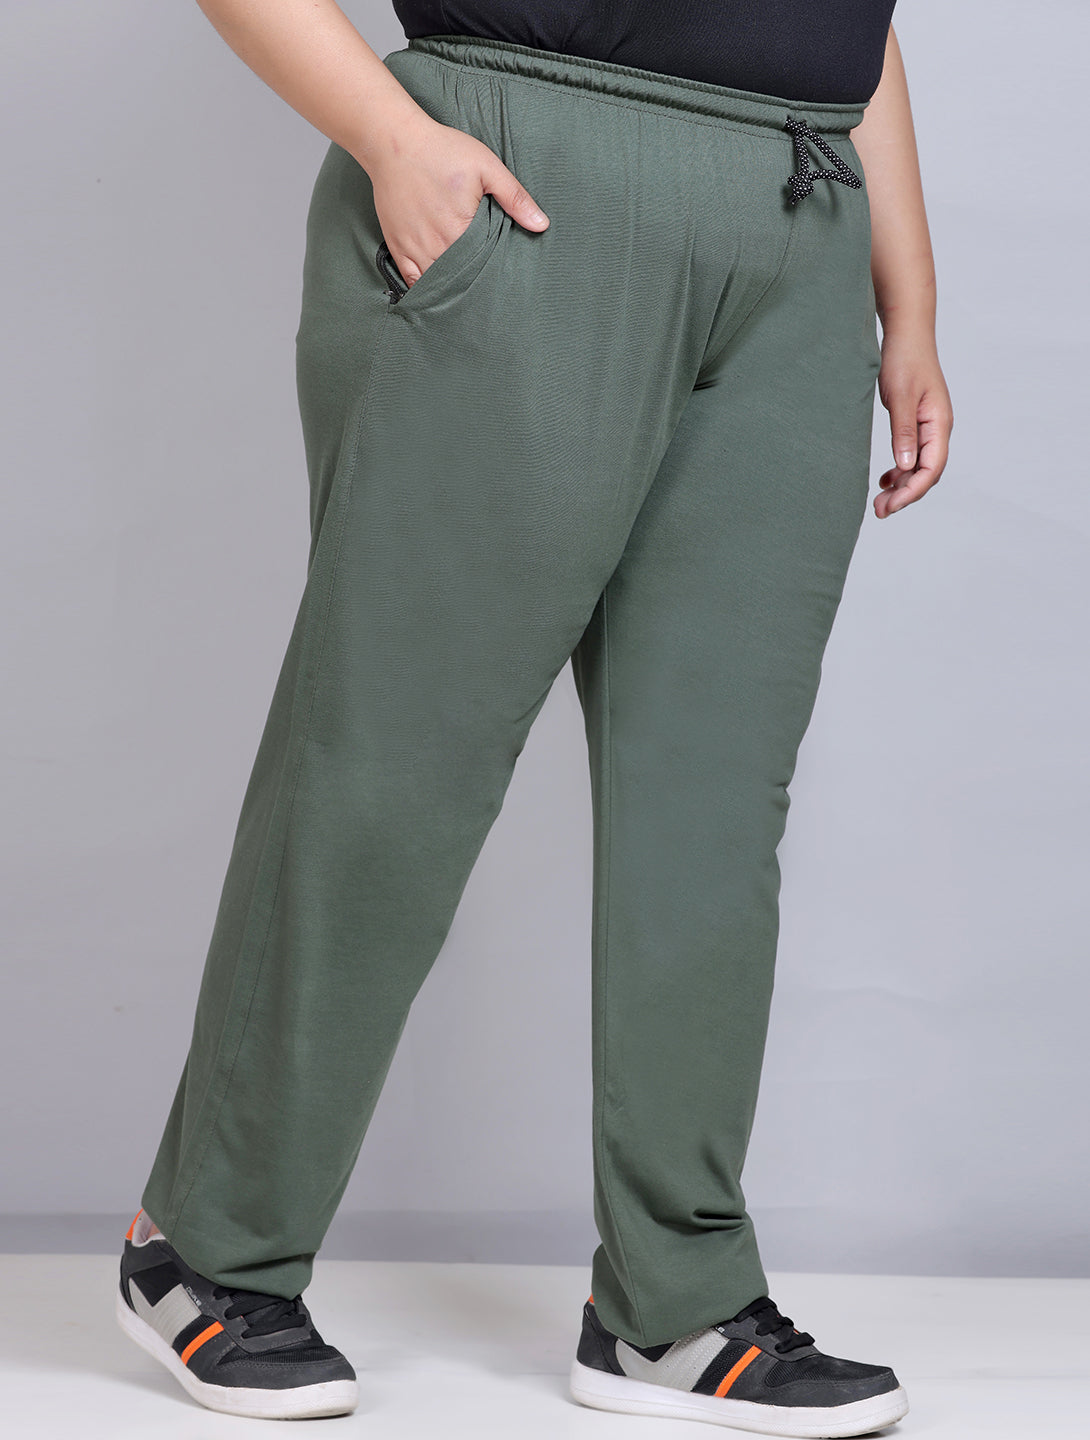 Cotton Track Pants For Women - Olive Green